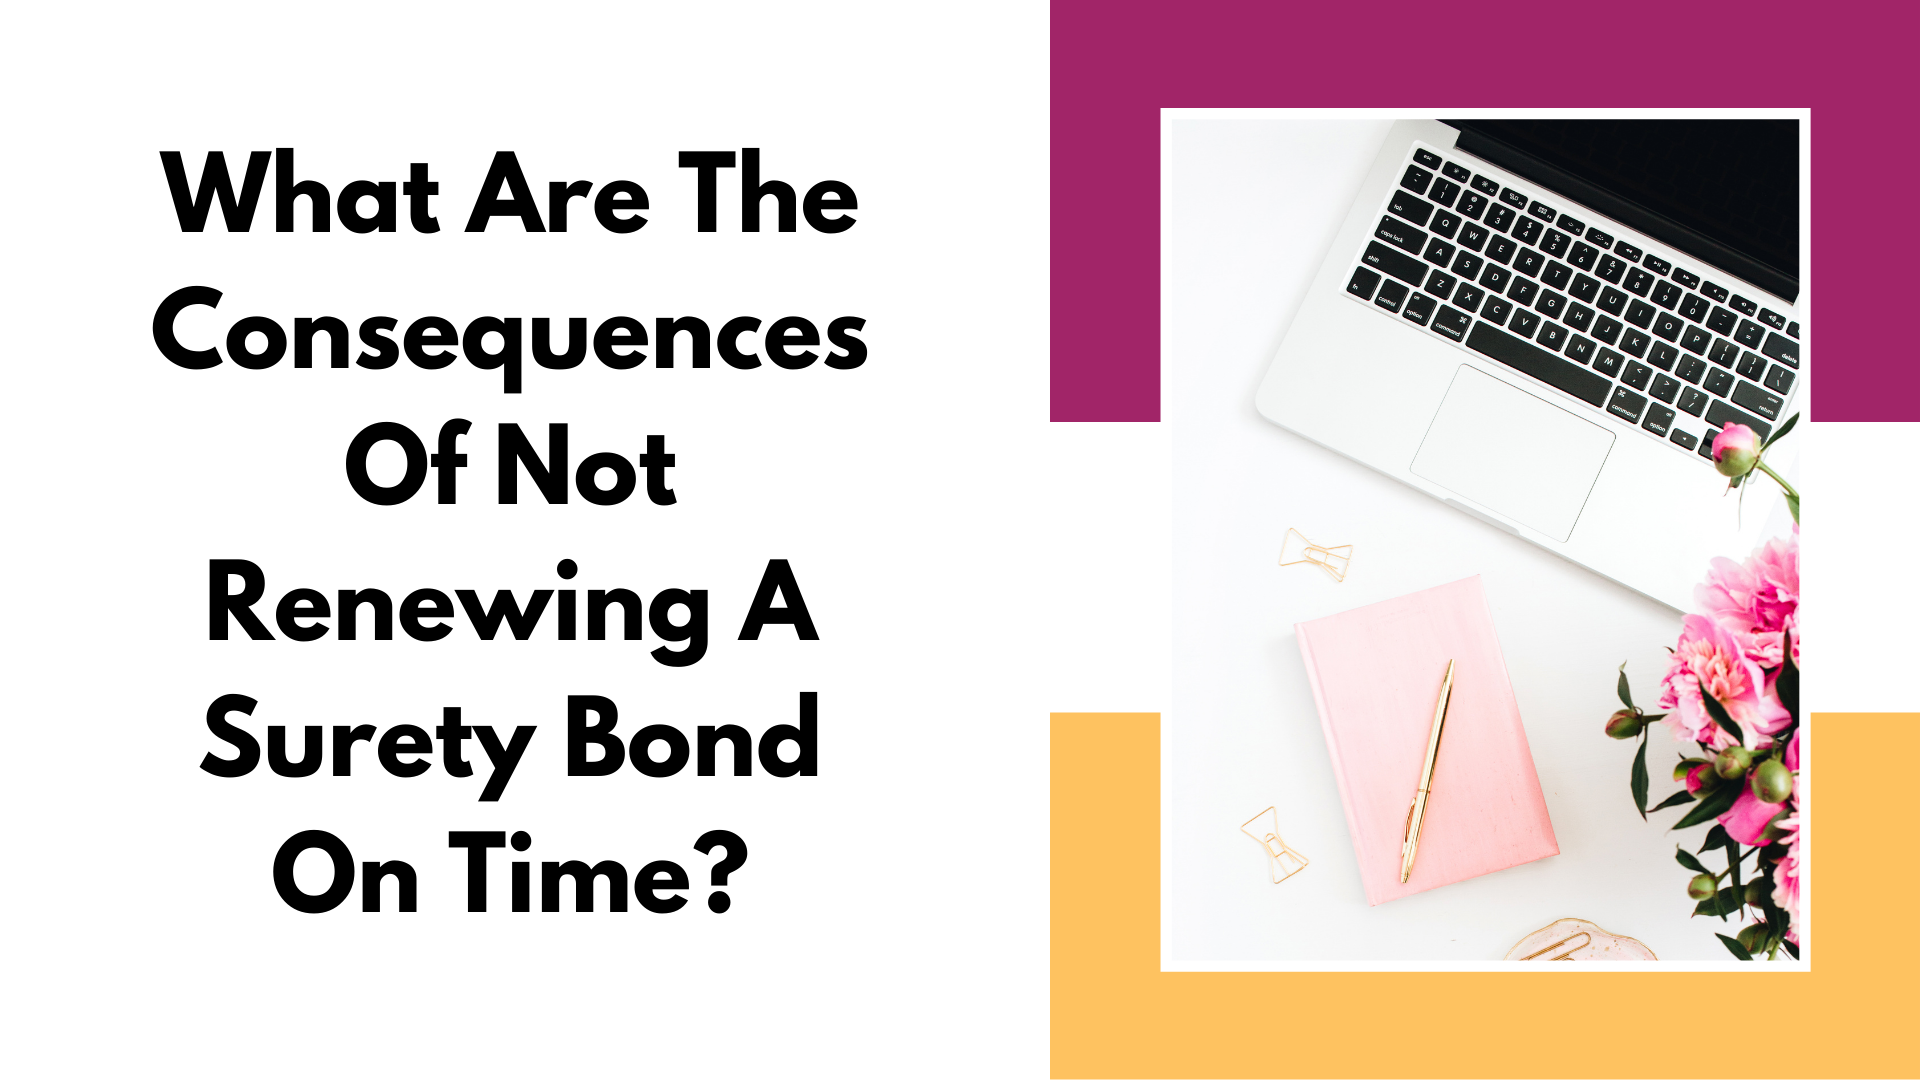 surety bond - What are the consequences of not renewing a surety bond on time - workspace